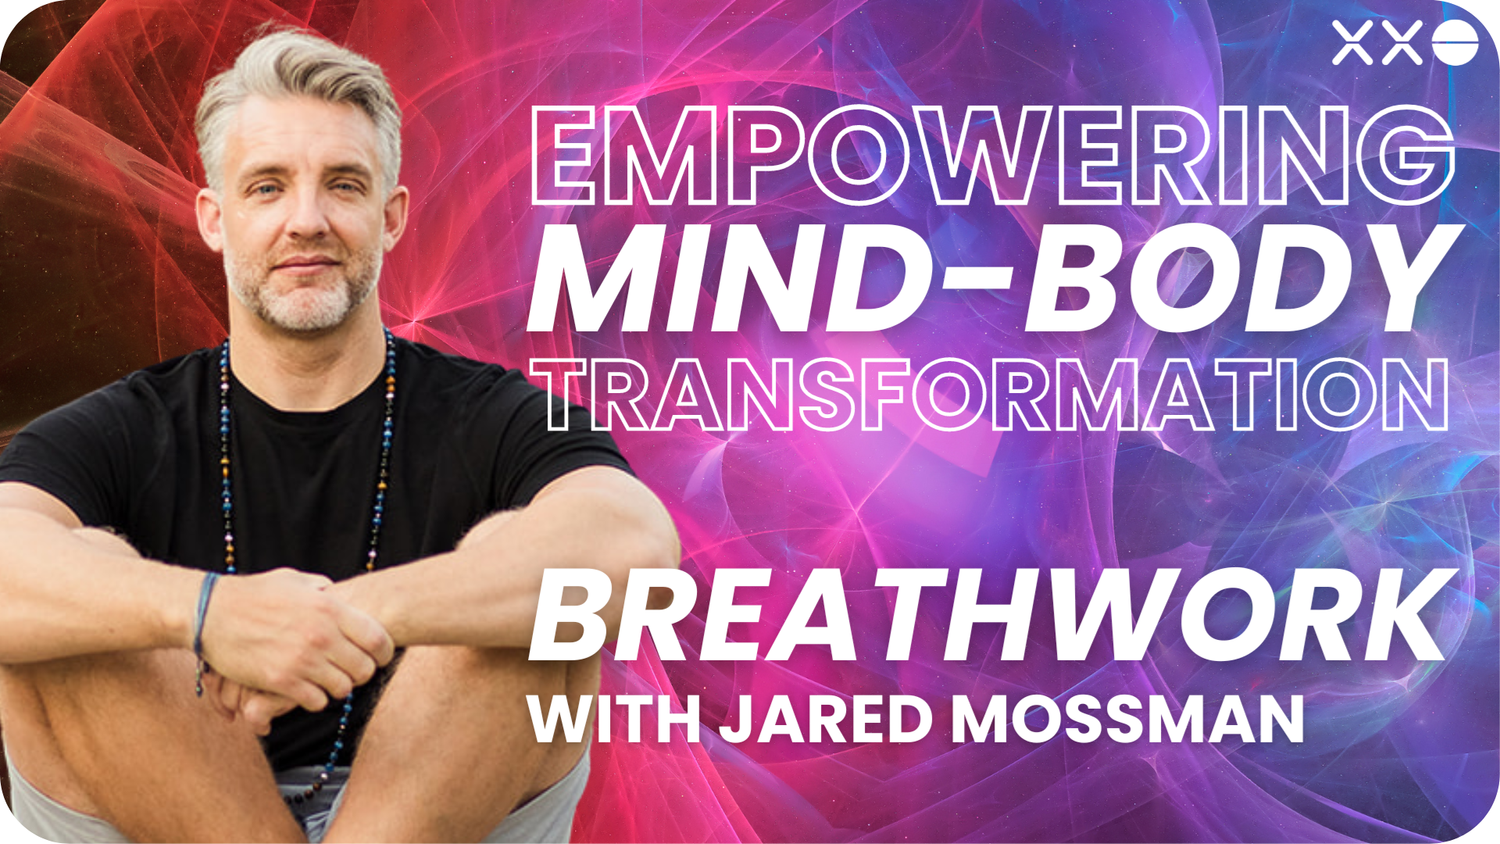 JARED+MOSSMAN+AT+XXO+CONNECT+EMPOWERING+MIND+BODY+TRANSFORMATION+BREATHWORK.png